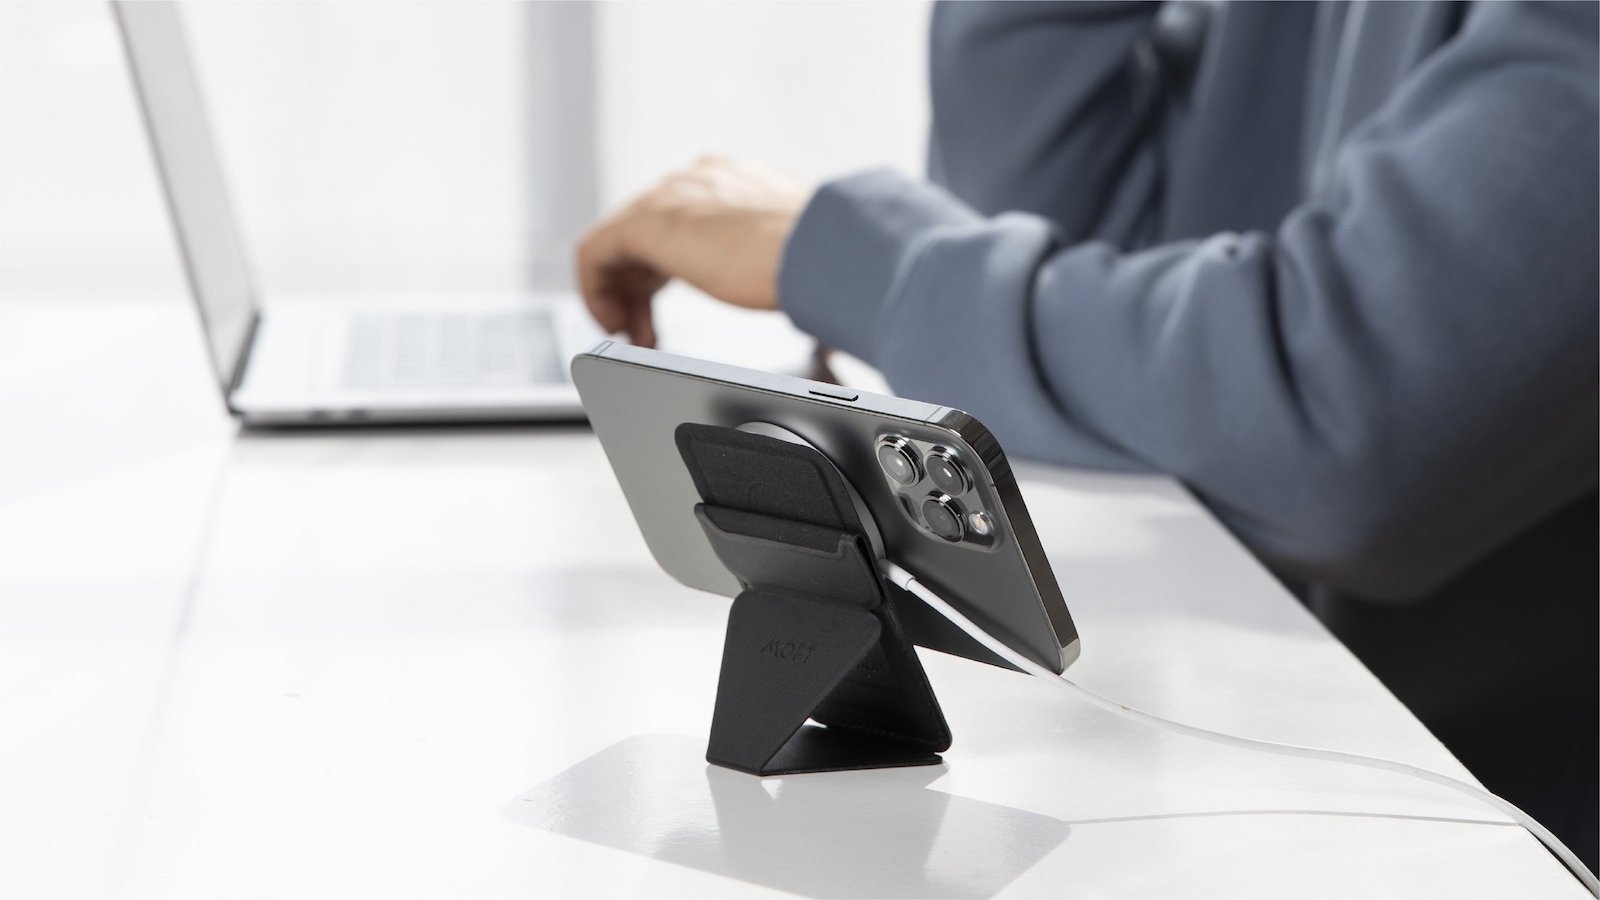 MOFT Snap-on Stand & Wallet for iPhone 12 series is sleek and holds up to three cards